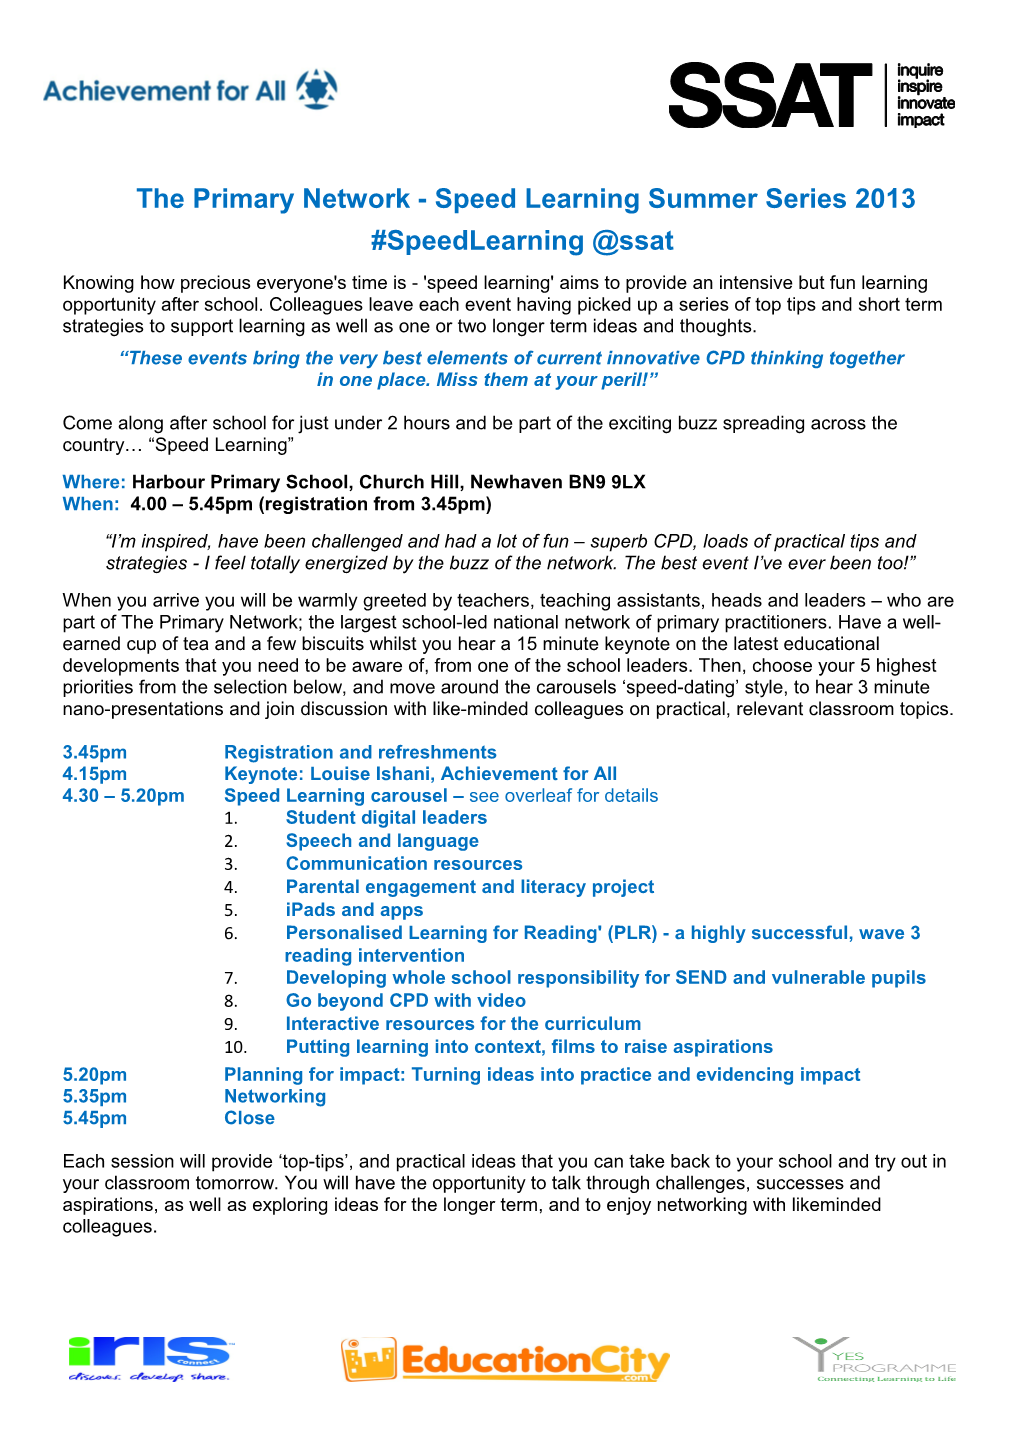 Harbour Primary Speed Learning Agenda 22 May